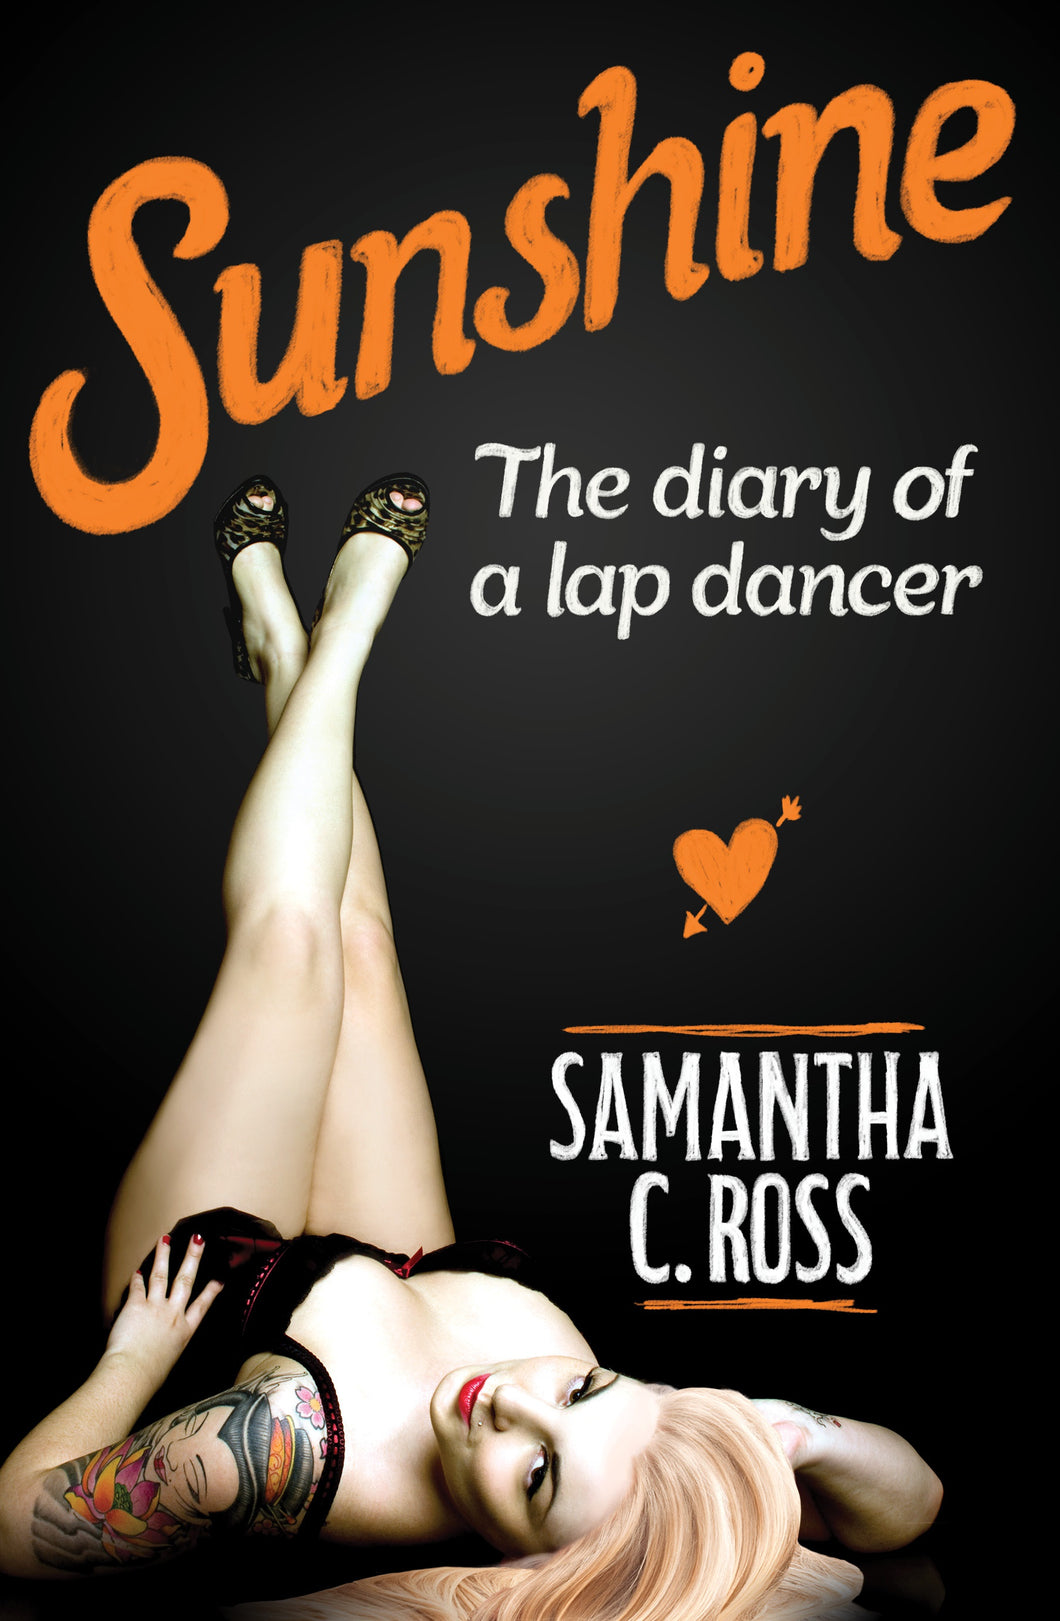 Sunshine-The Diary of a Lap Dancer by Samantha C. Ross: stock image of front cover.